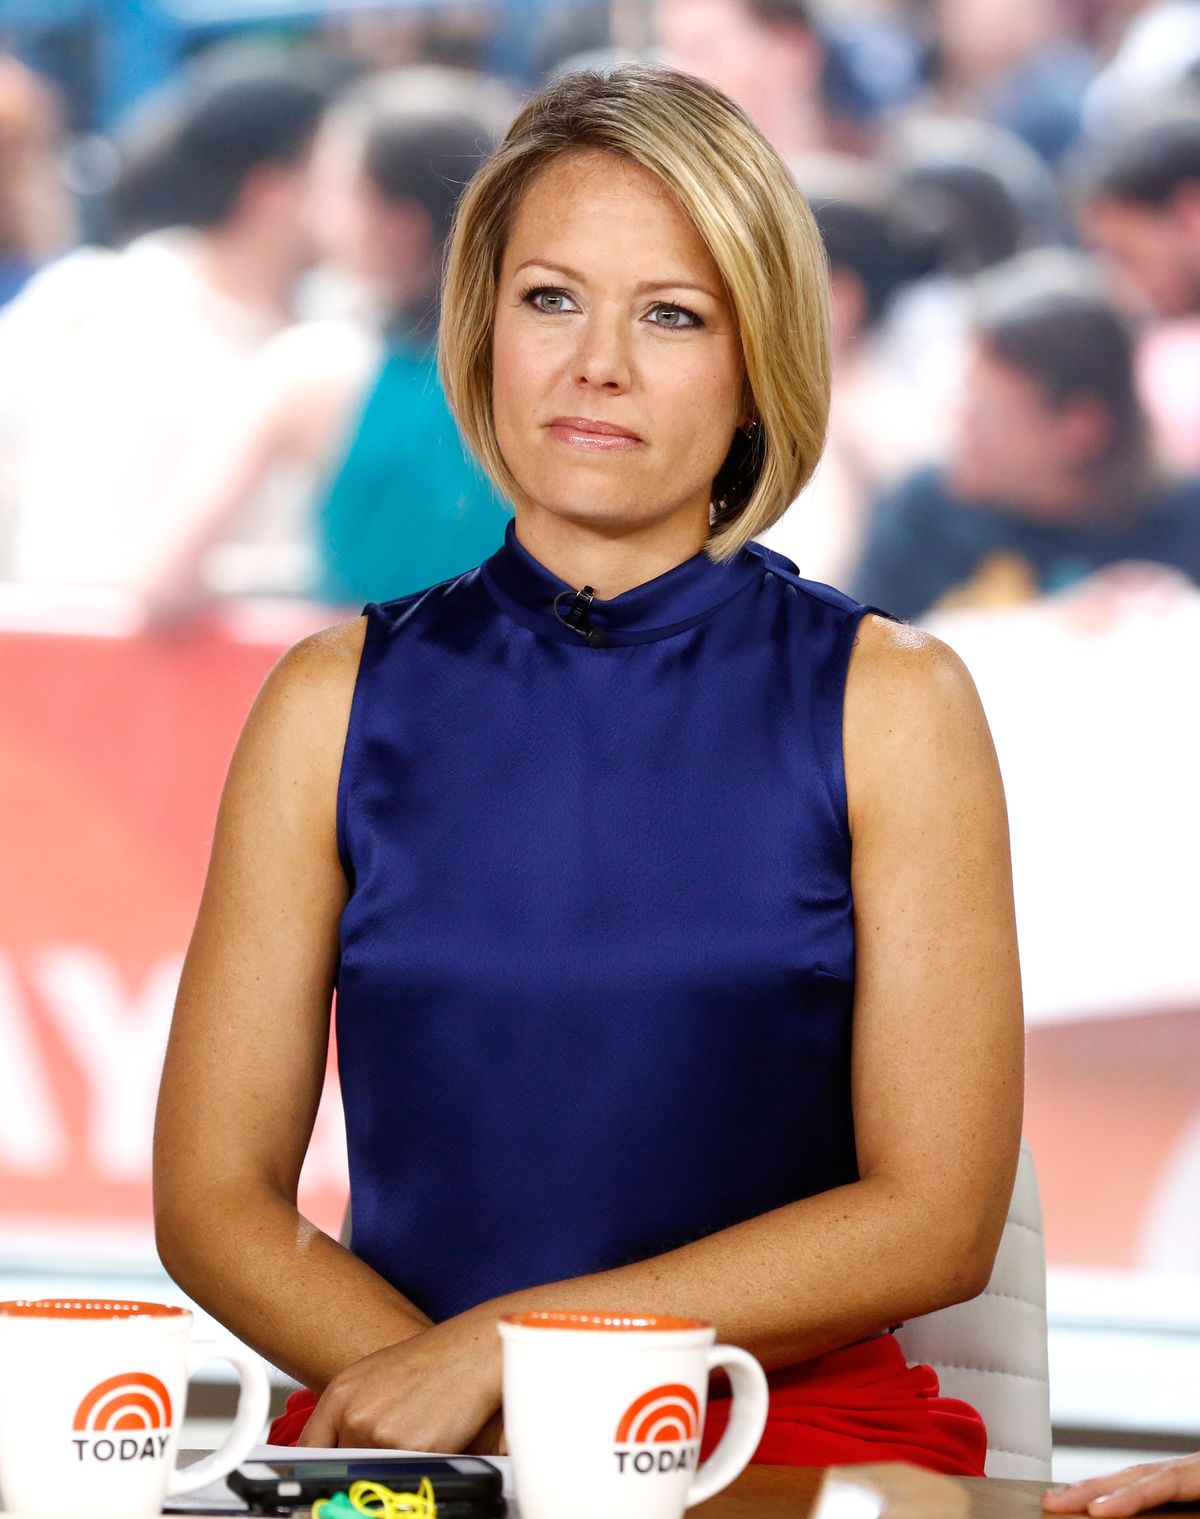 Dylan Dreyer on NBC News' season 63 of the "Today" show on September 01, 2014 | Photo: Peter Kramer/NBC/NBC Newswire/NBCUniversal/Getty Images